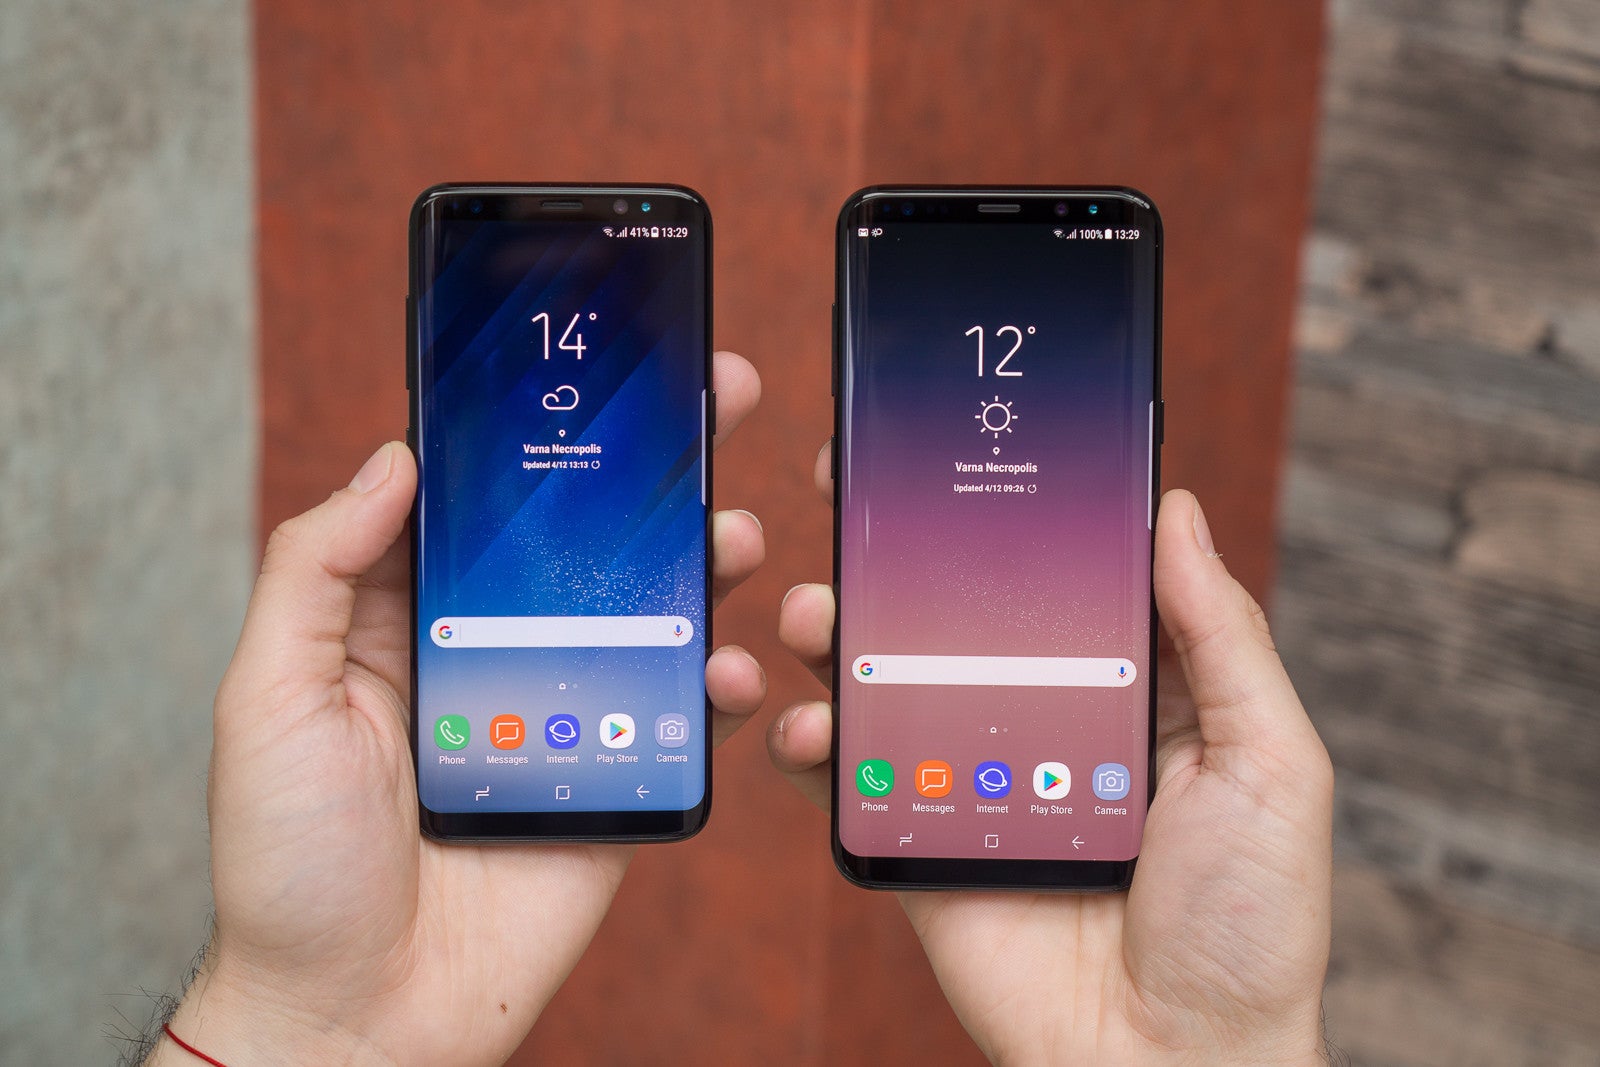 Deal: Dual-SIM Samsung Galaxy S8 and Galaxy S8+ cost just $579.99 and $665.99 on eBay